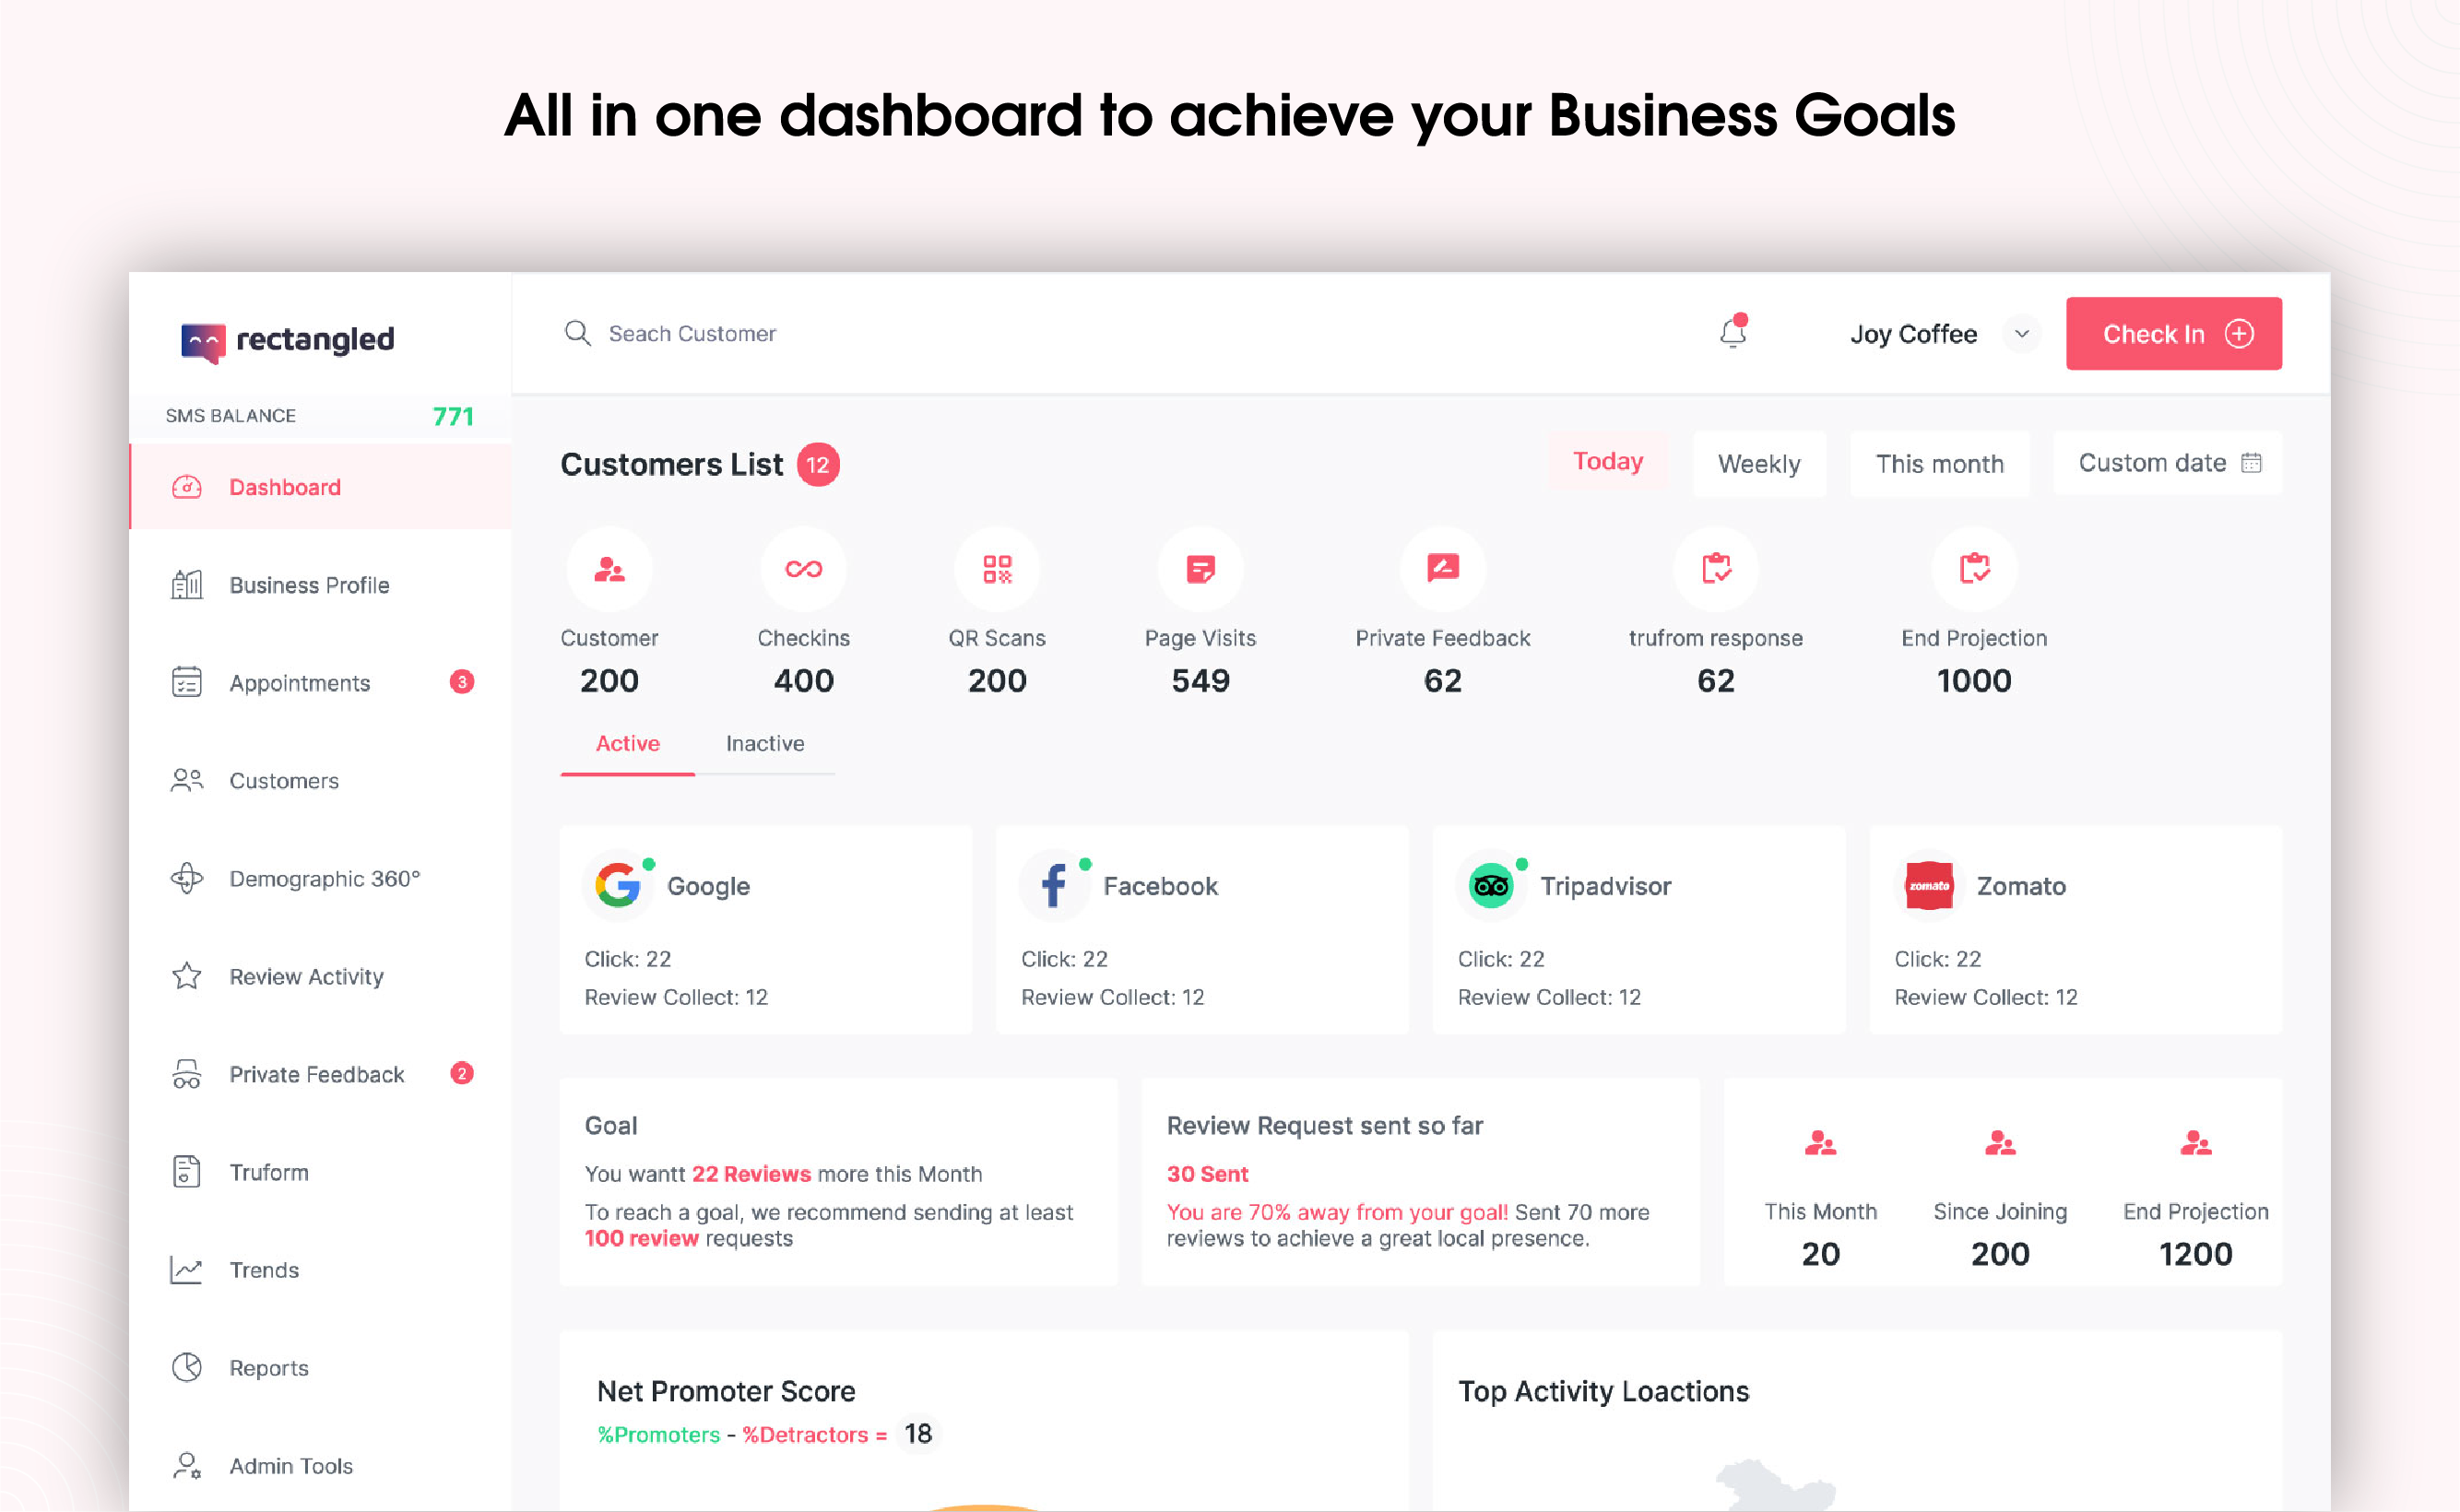 All-in one and easy to use dashboard